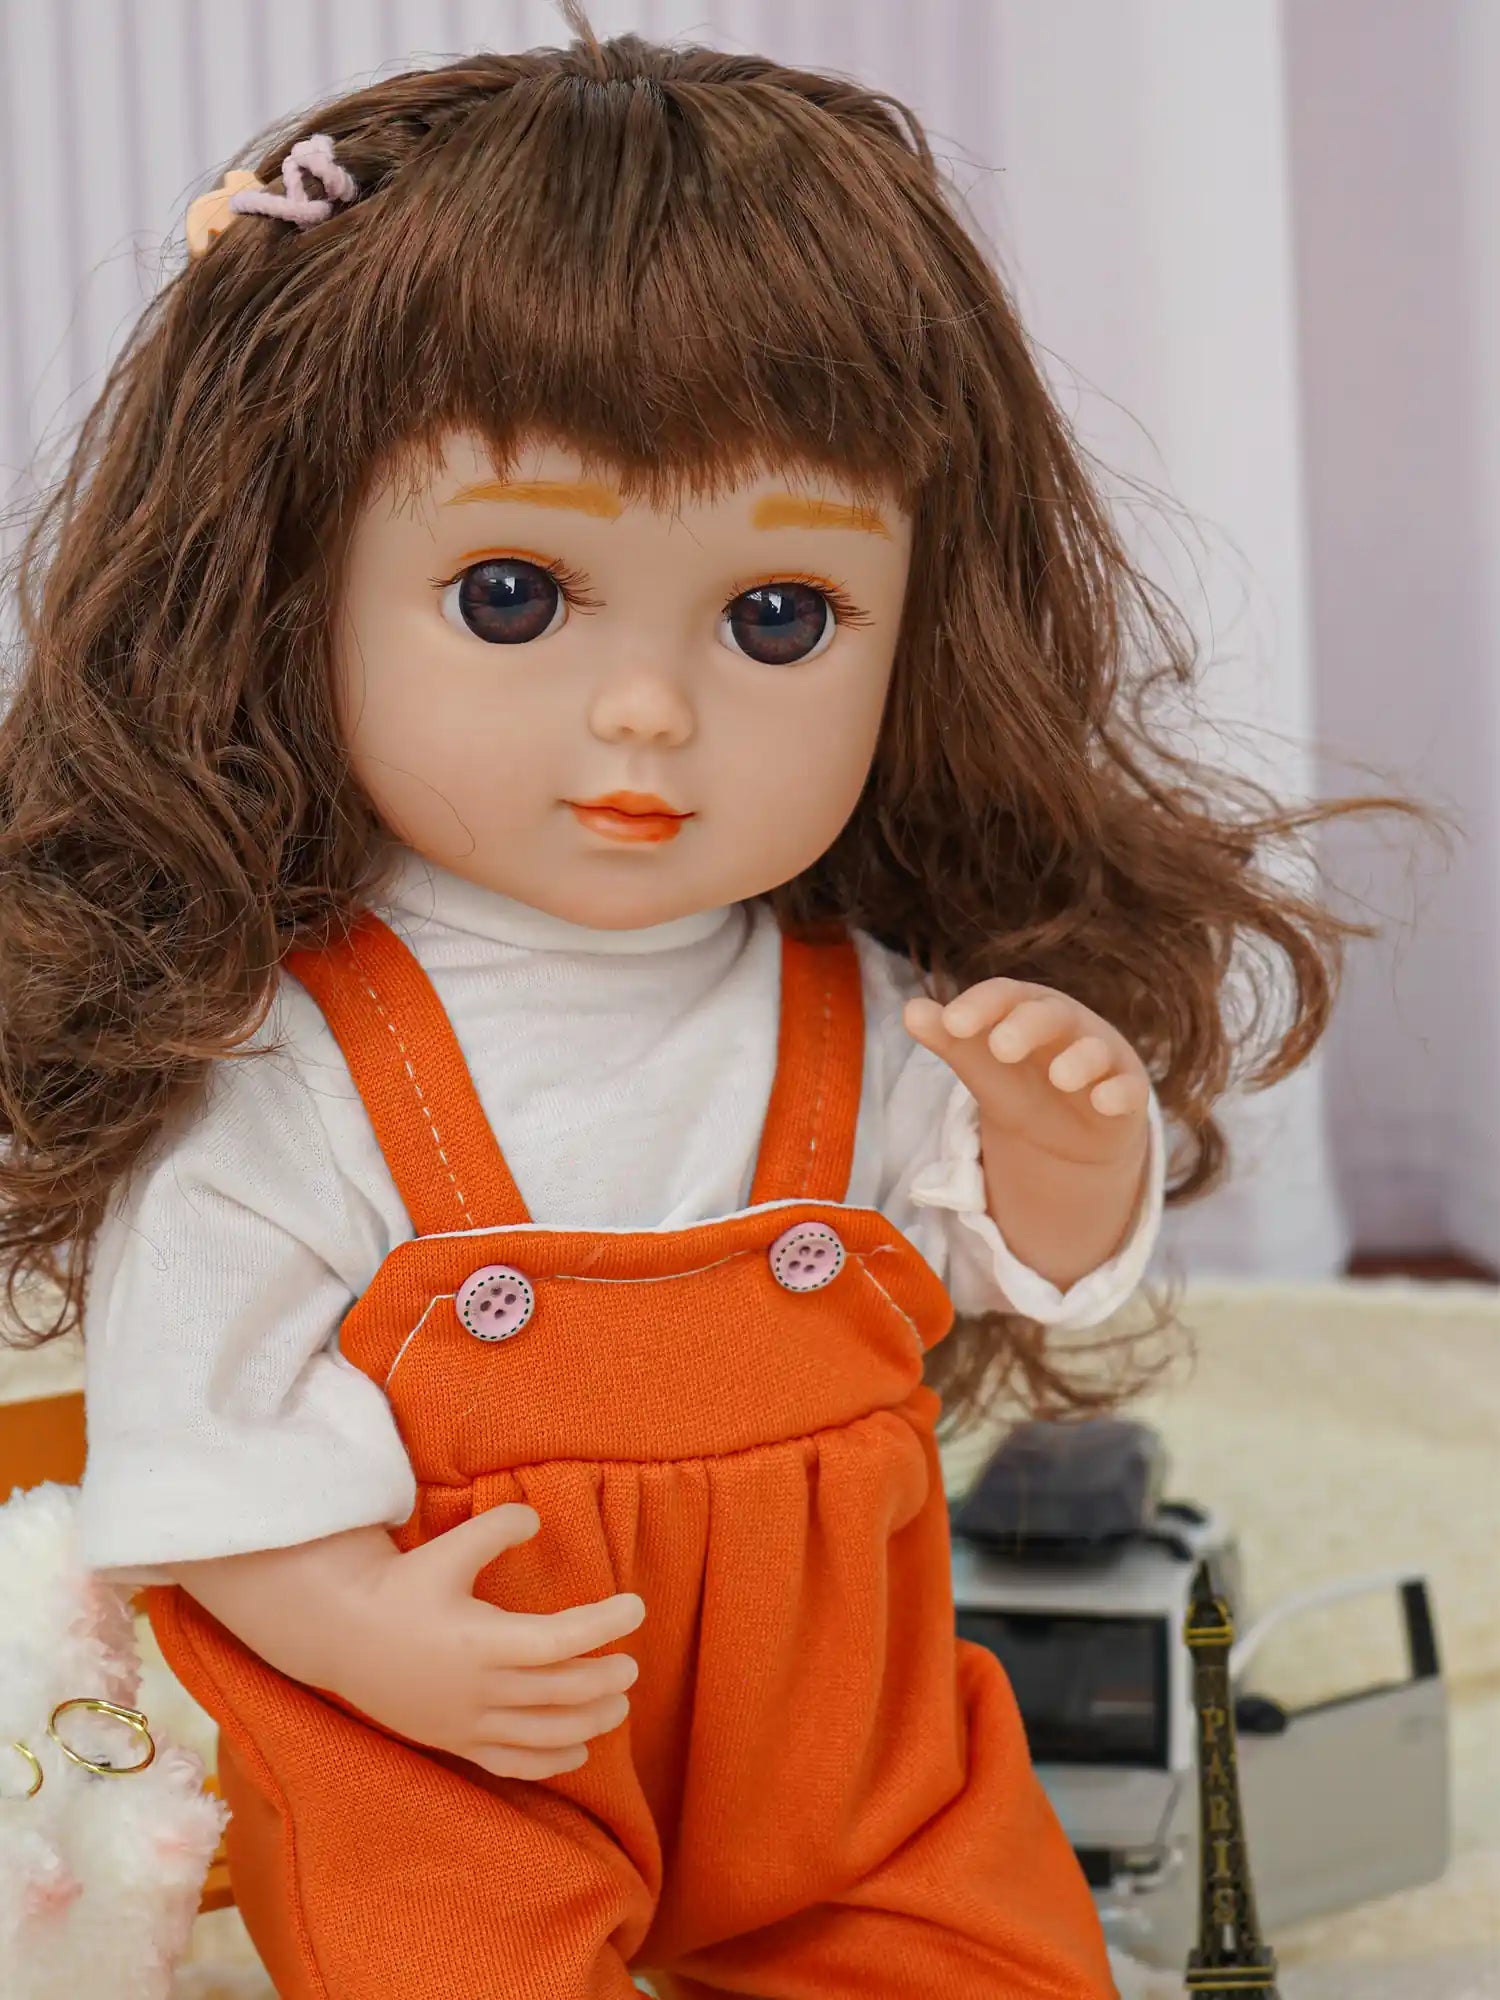 Seated doll with wavy hair, white and orange outfit, next to a plush dog and Paris landmark.